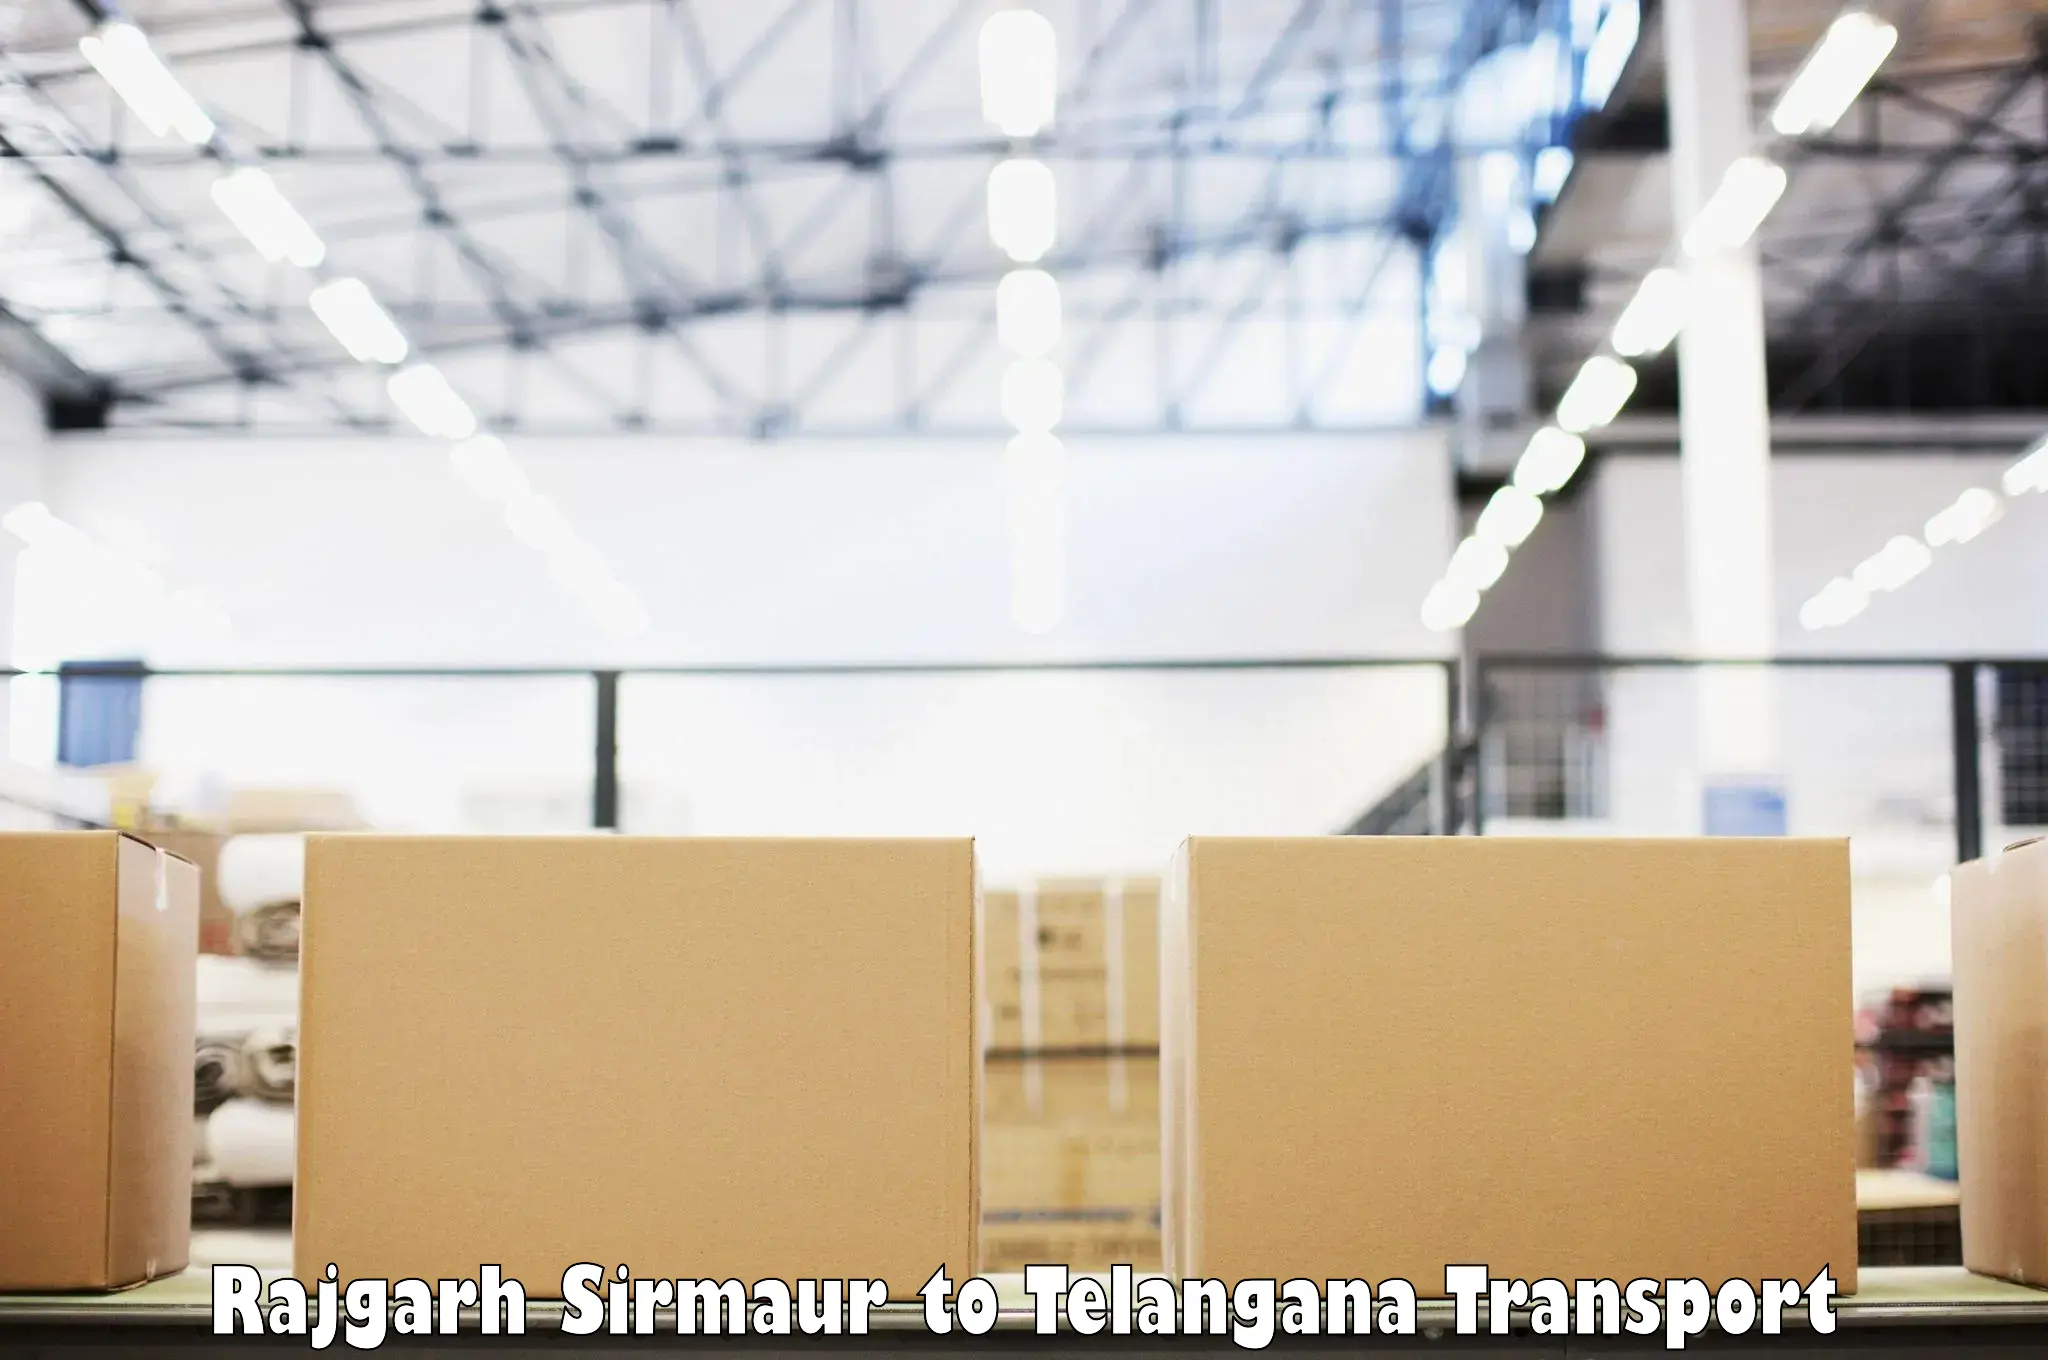 Commercial transport service Rajgarh Sirmaur to Khairatabad